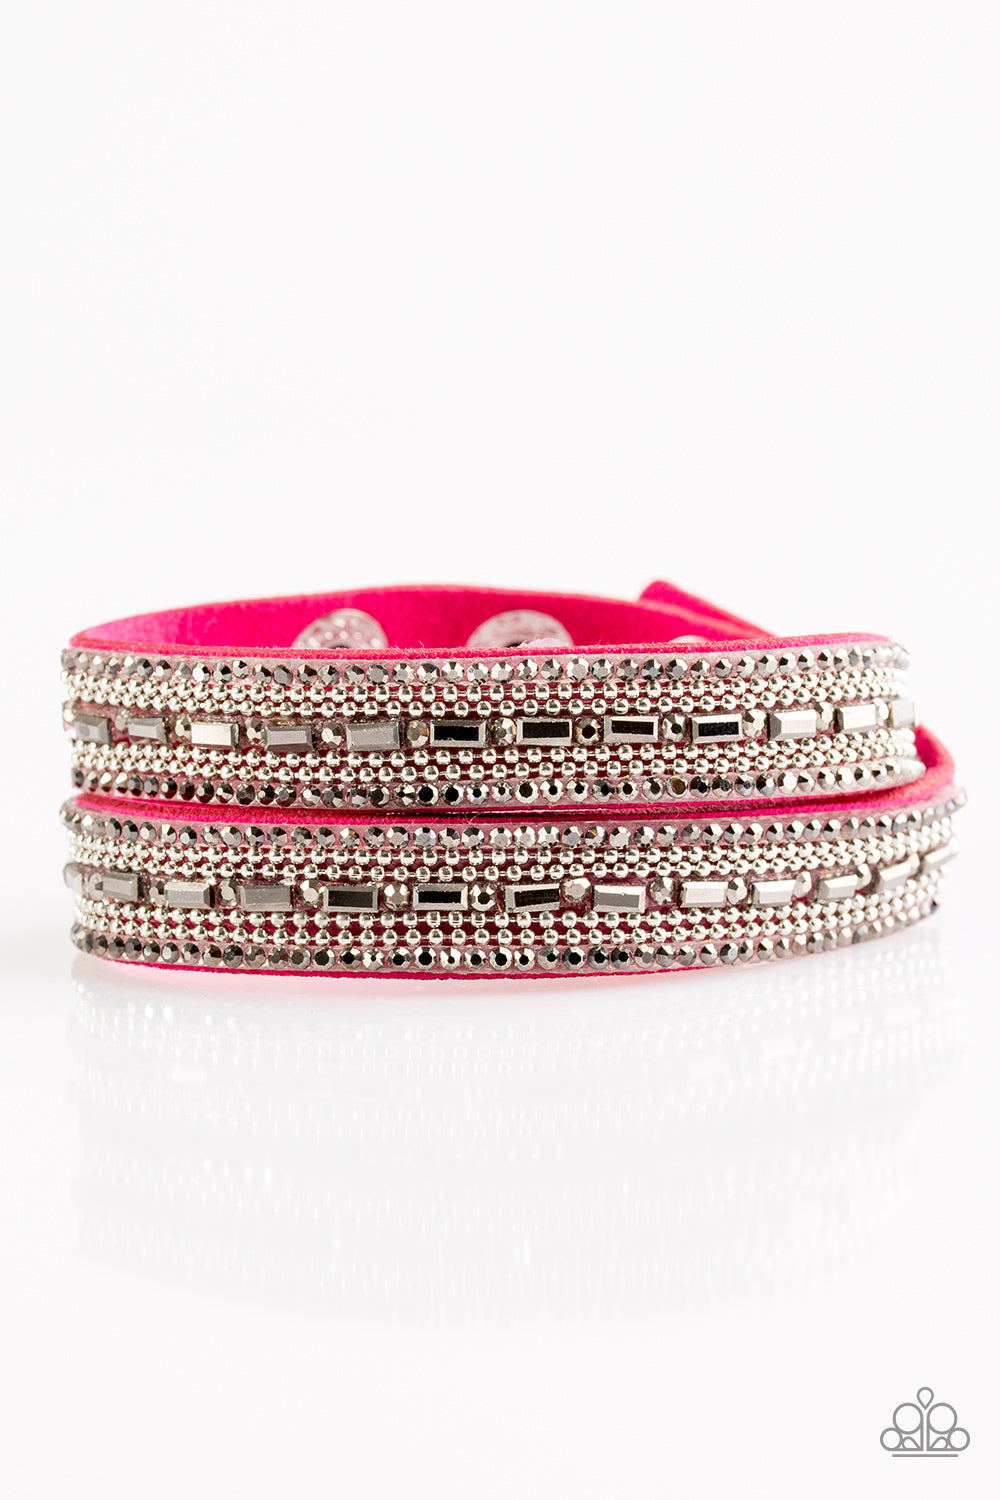 five-dollar-jewelry-shimmer-and-sass-pink-bracelet-paparazzi-accessories